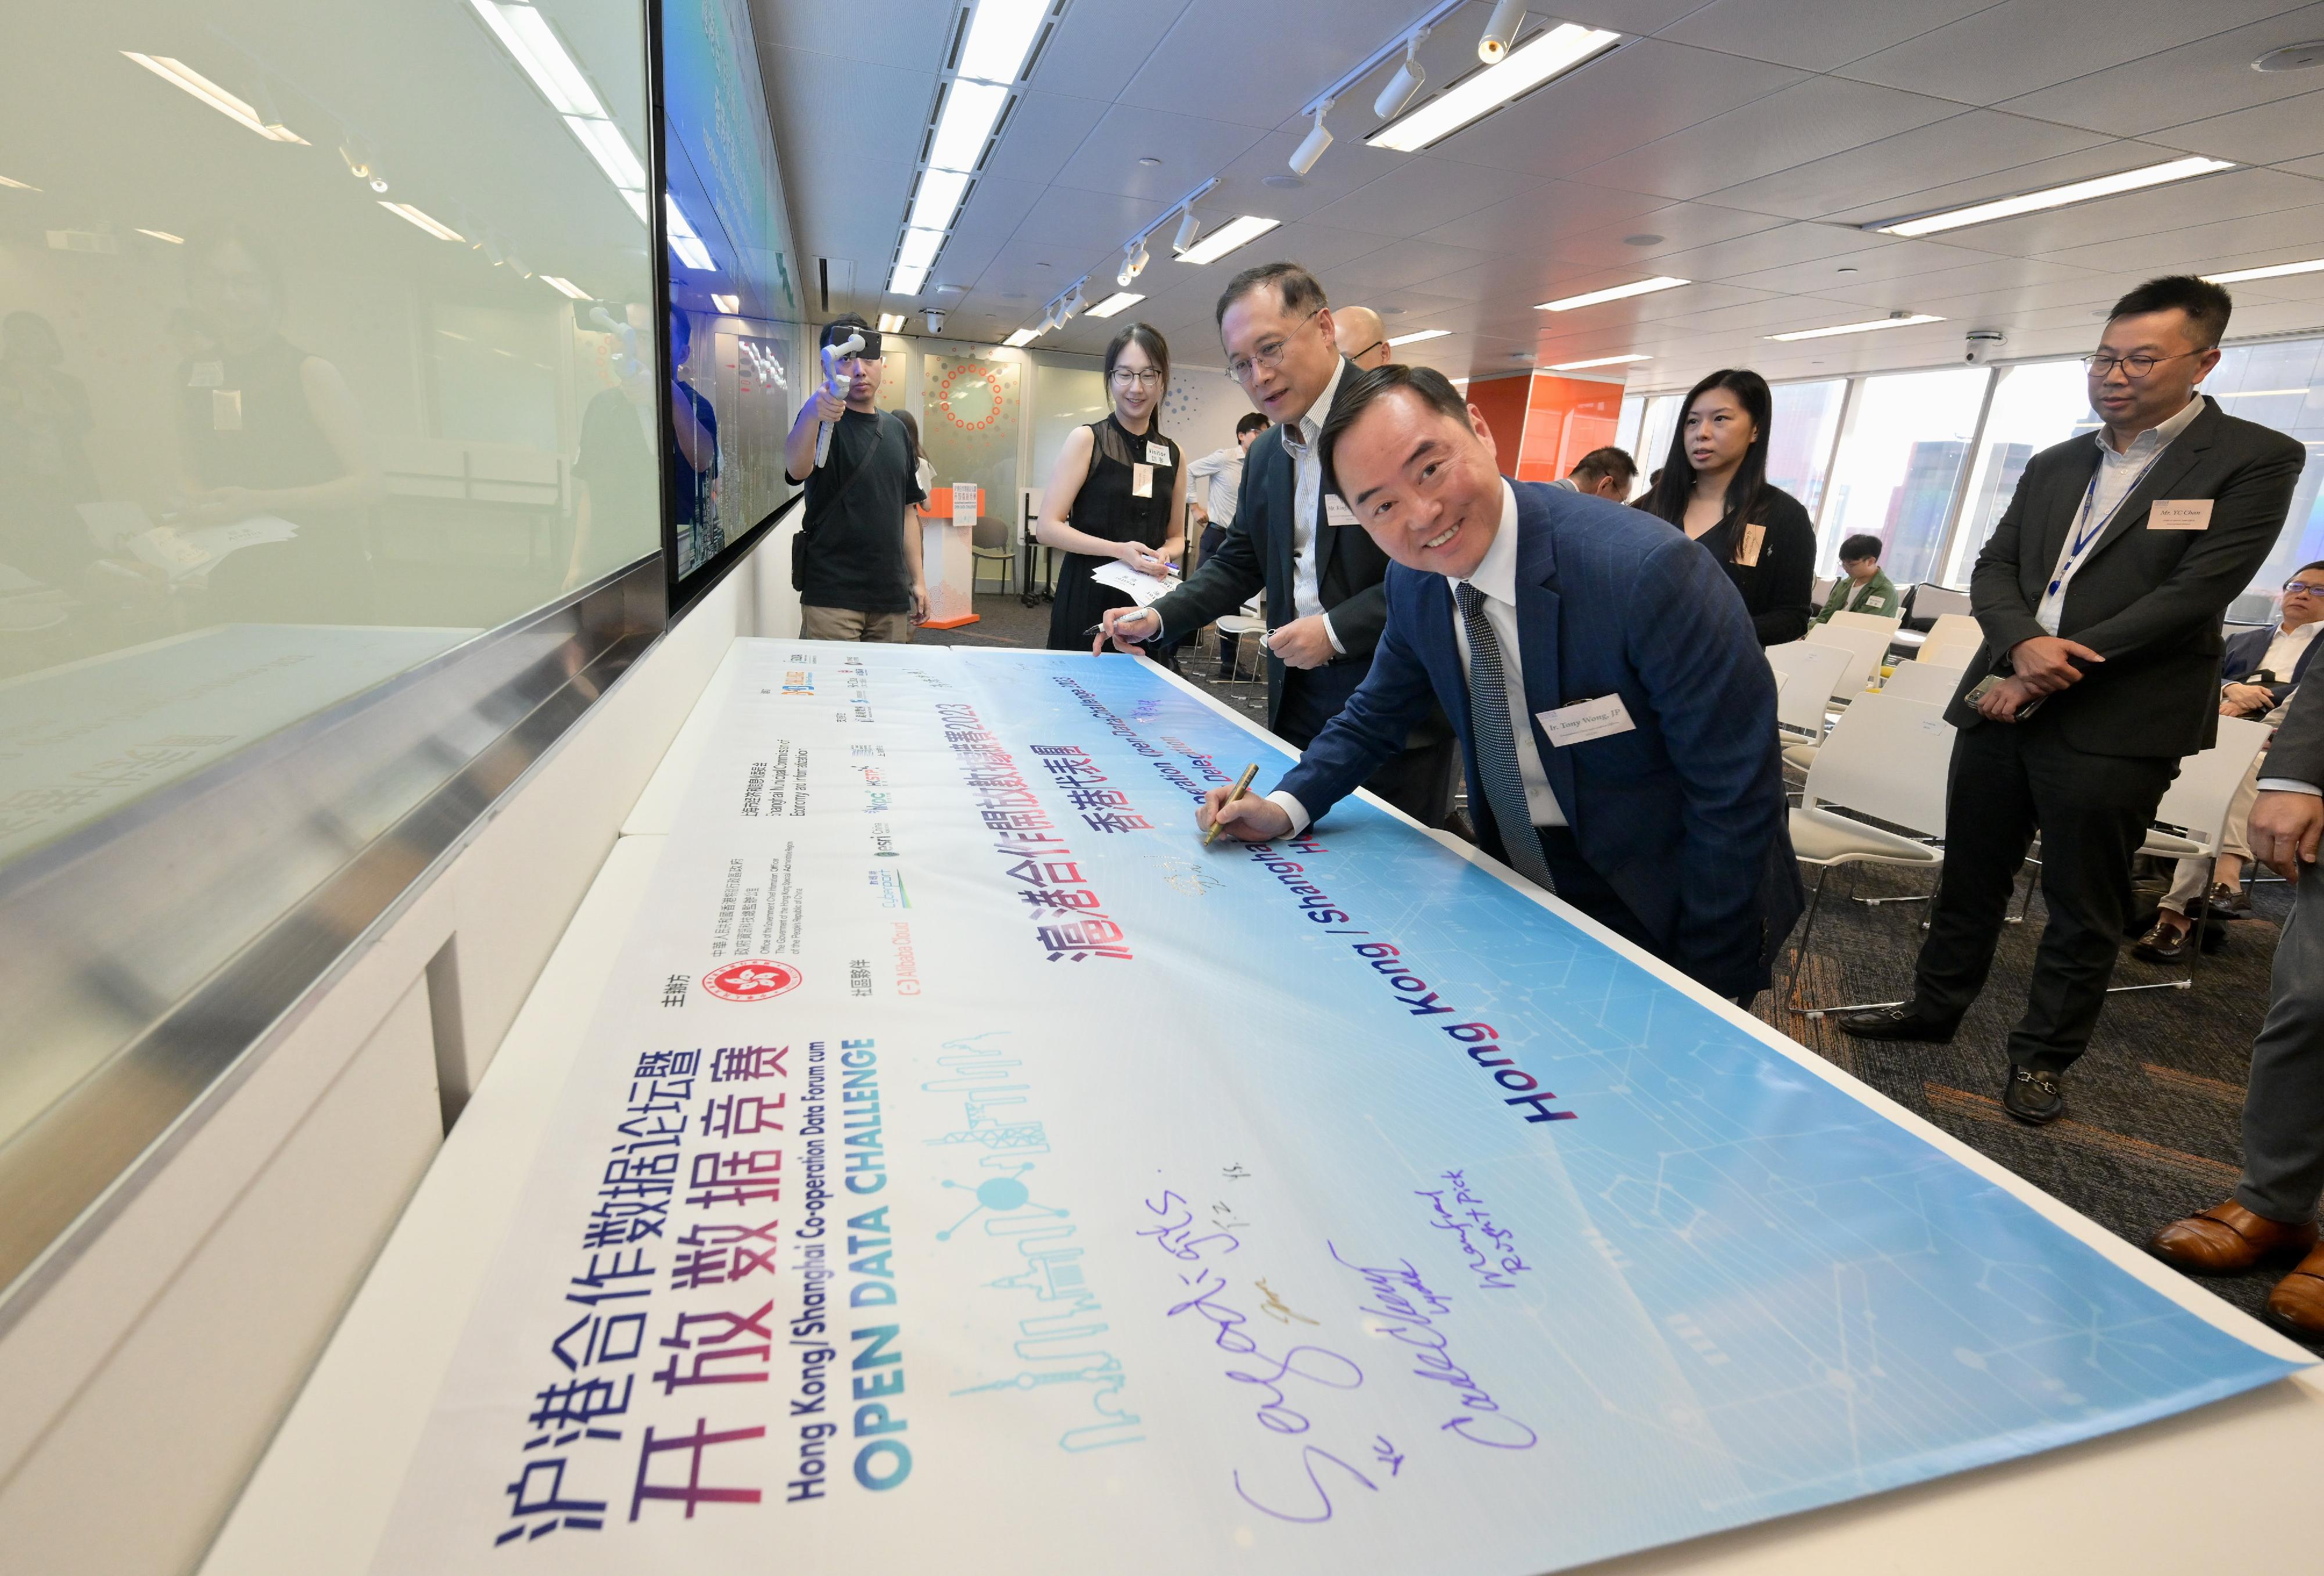 The Government Chief Information Officer, Mr Tony Wong, attended the Hong Kong Delegation Send-off Ceremony for the Hong Kong/Shanghai Co-operation Open Data Challenge 2023 today (August 8) and presented a banner with words of blessings to the Hong Kong delegation, wishing them a great victory and success in Shanghai.